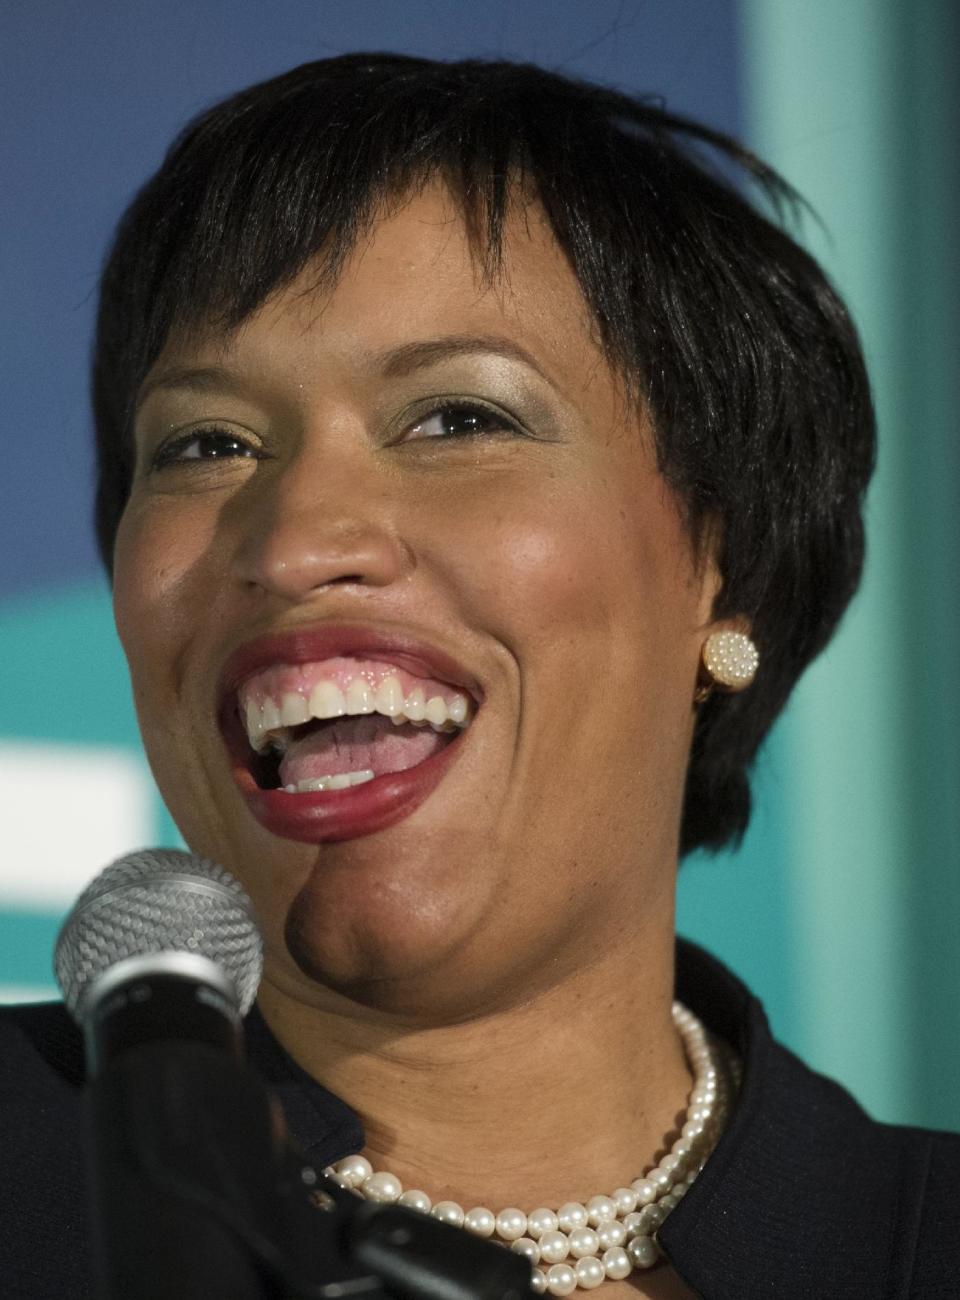 D.C. Mayoral candidate, and Council Member Muriel Bowser addresses her supporters at her election night watch party to await the Democrate Primary results in Washington, Tuesday, April 1, 2014. (AP Photo/Cliff Owen)